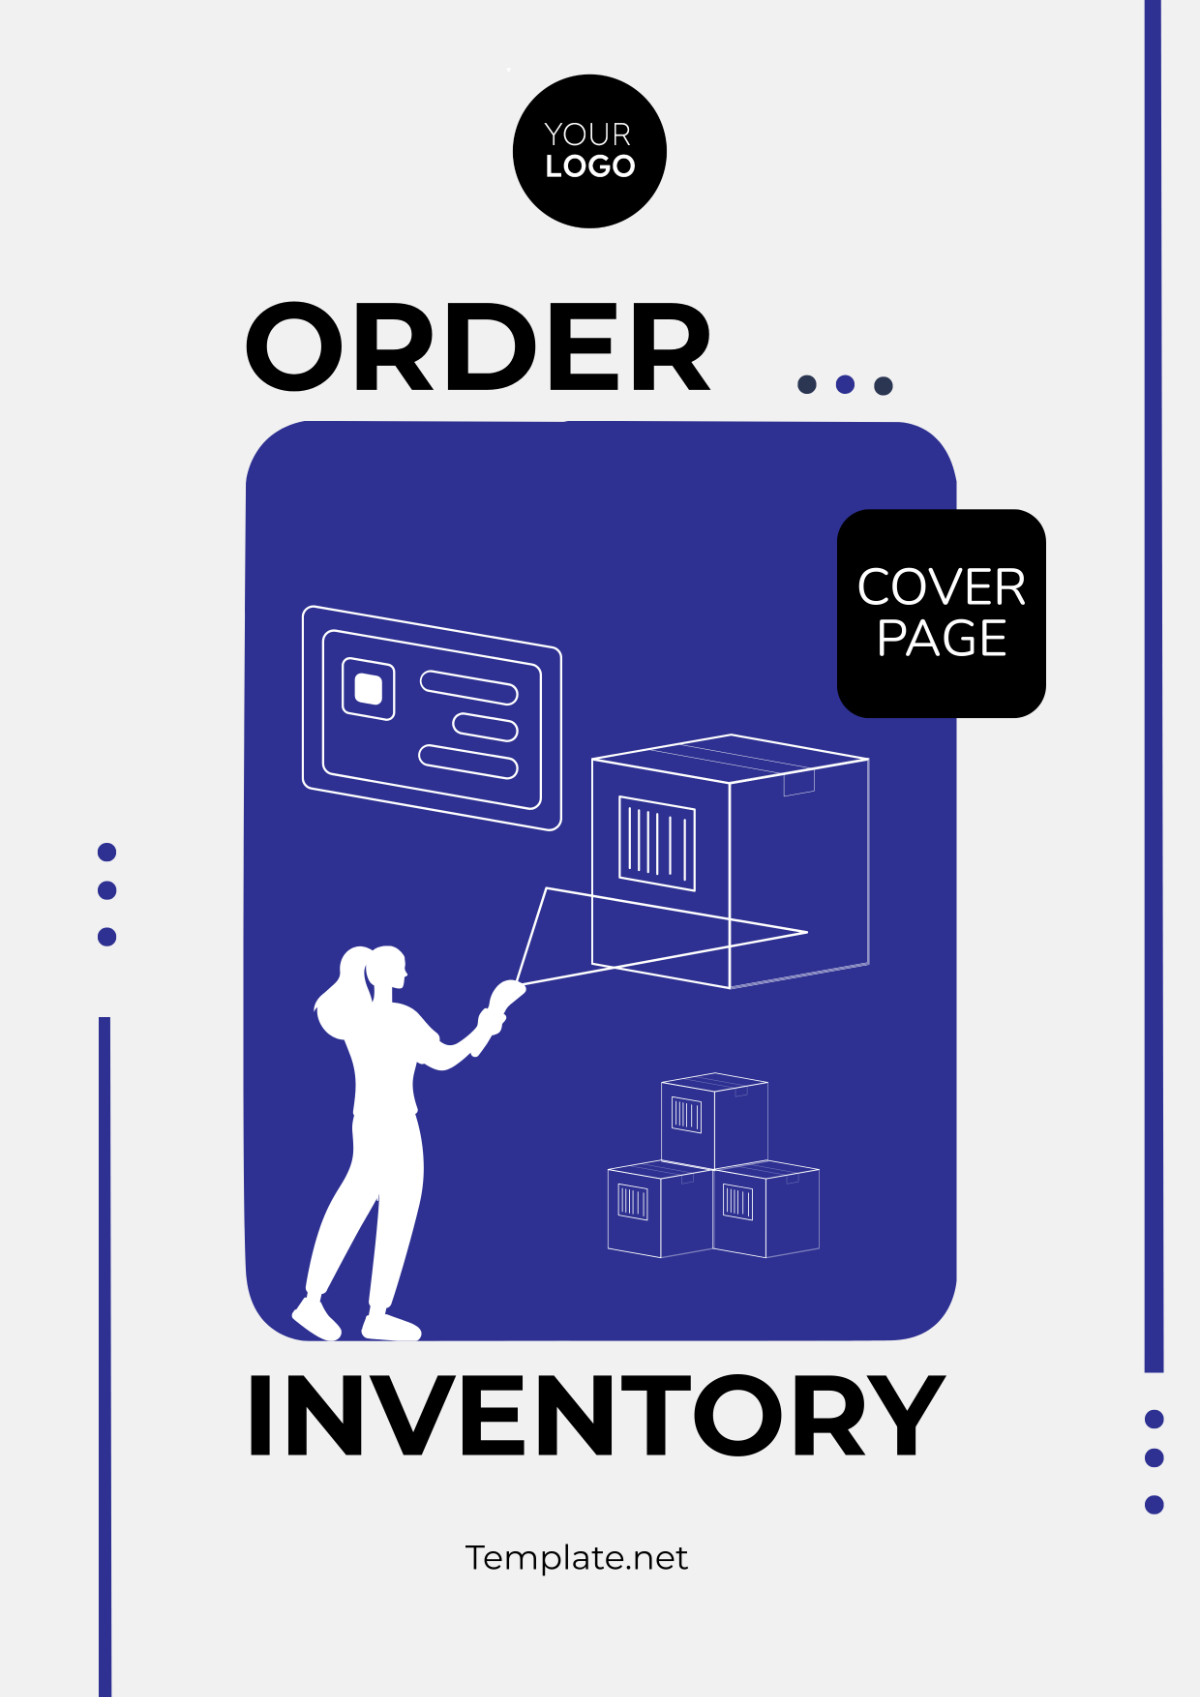 Order Inventory Cover Page Template